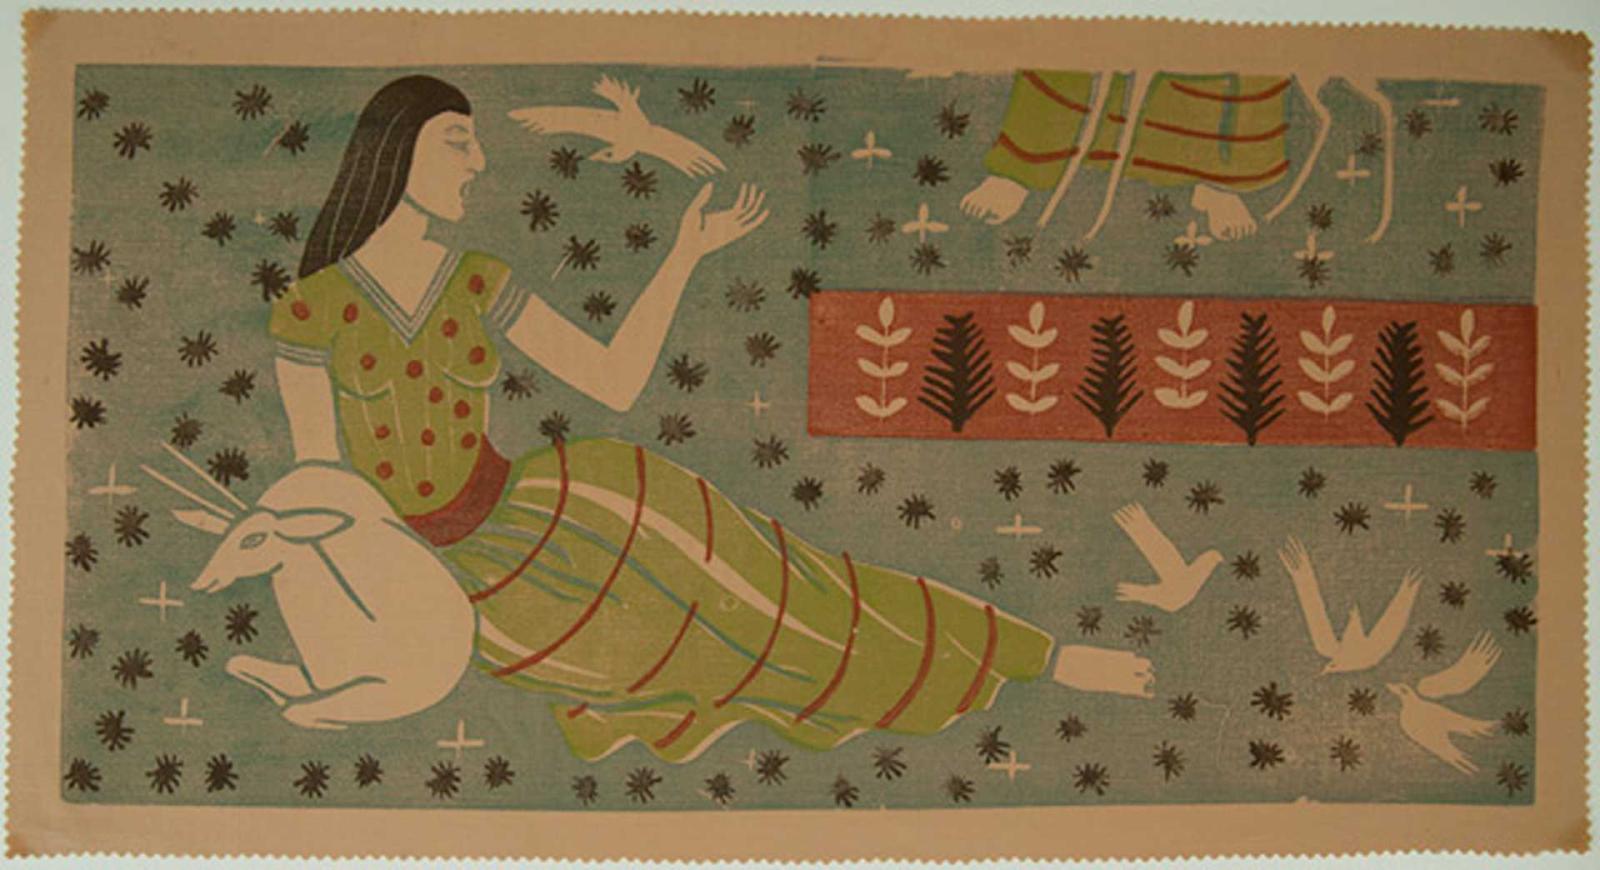 On the left side, a stylized image of a woman half-laying down on a field of blue with a white goat and doves around her. A horizontal band of red with white and black leafy designs on the right. 